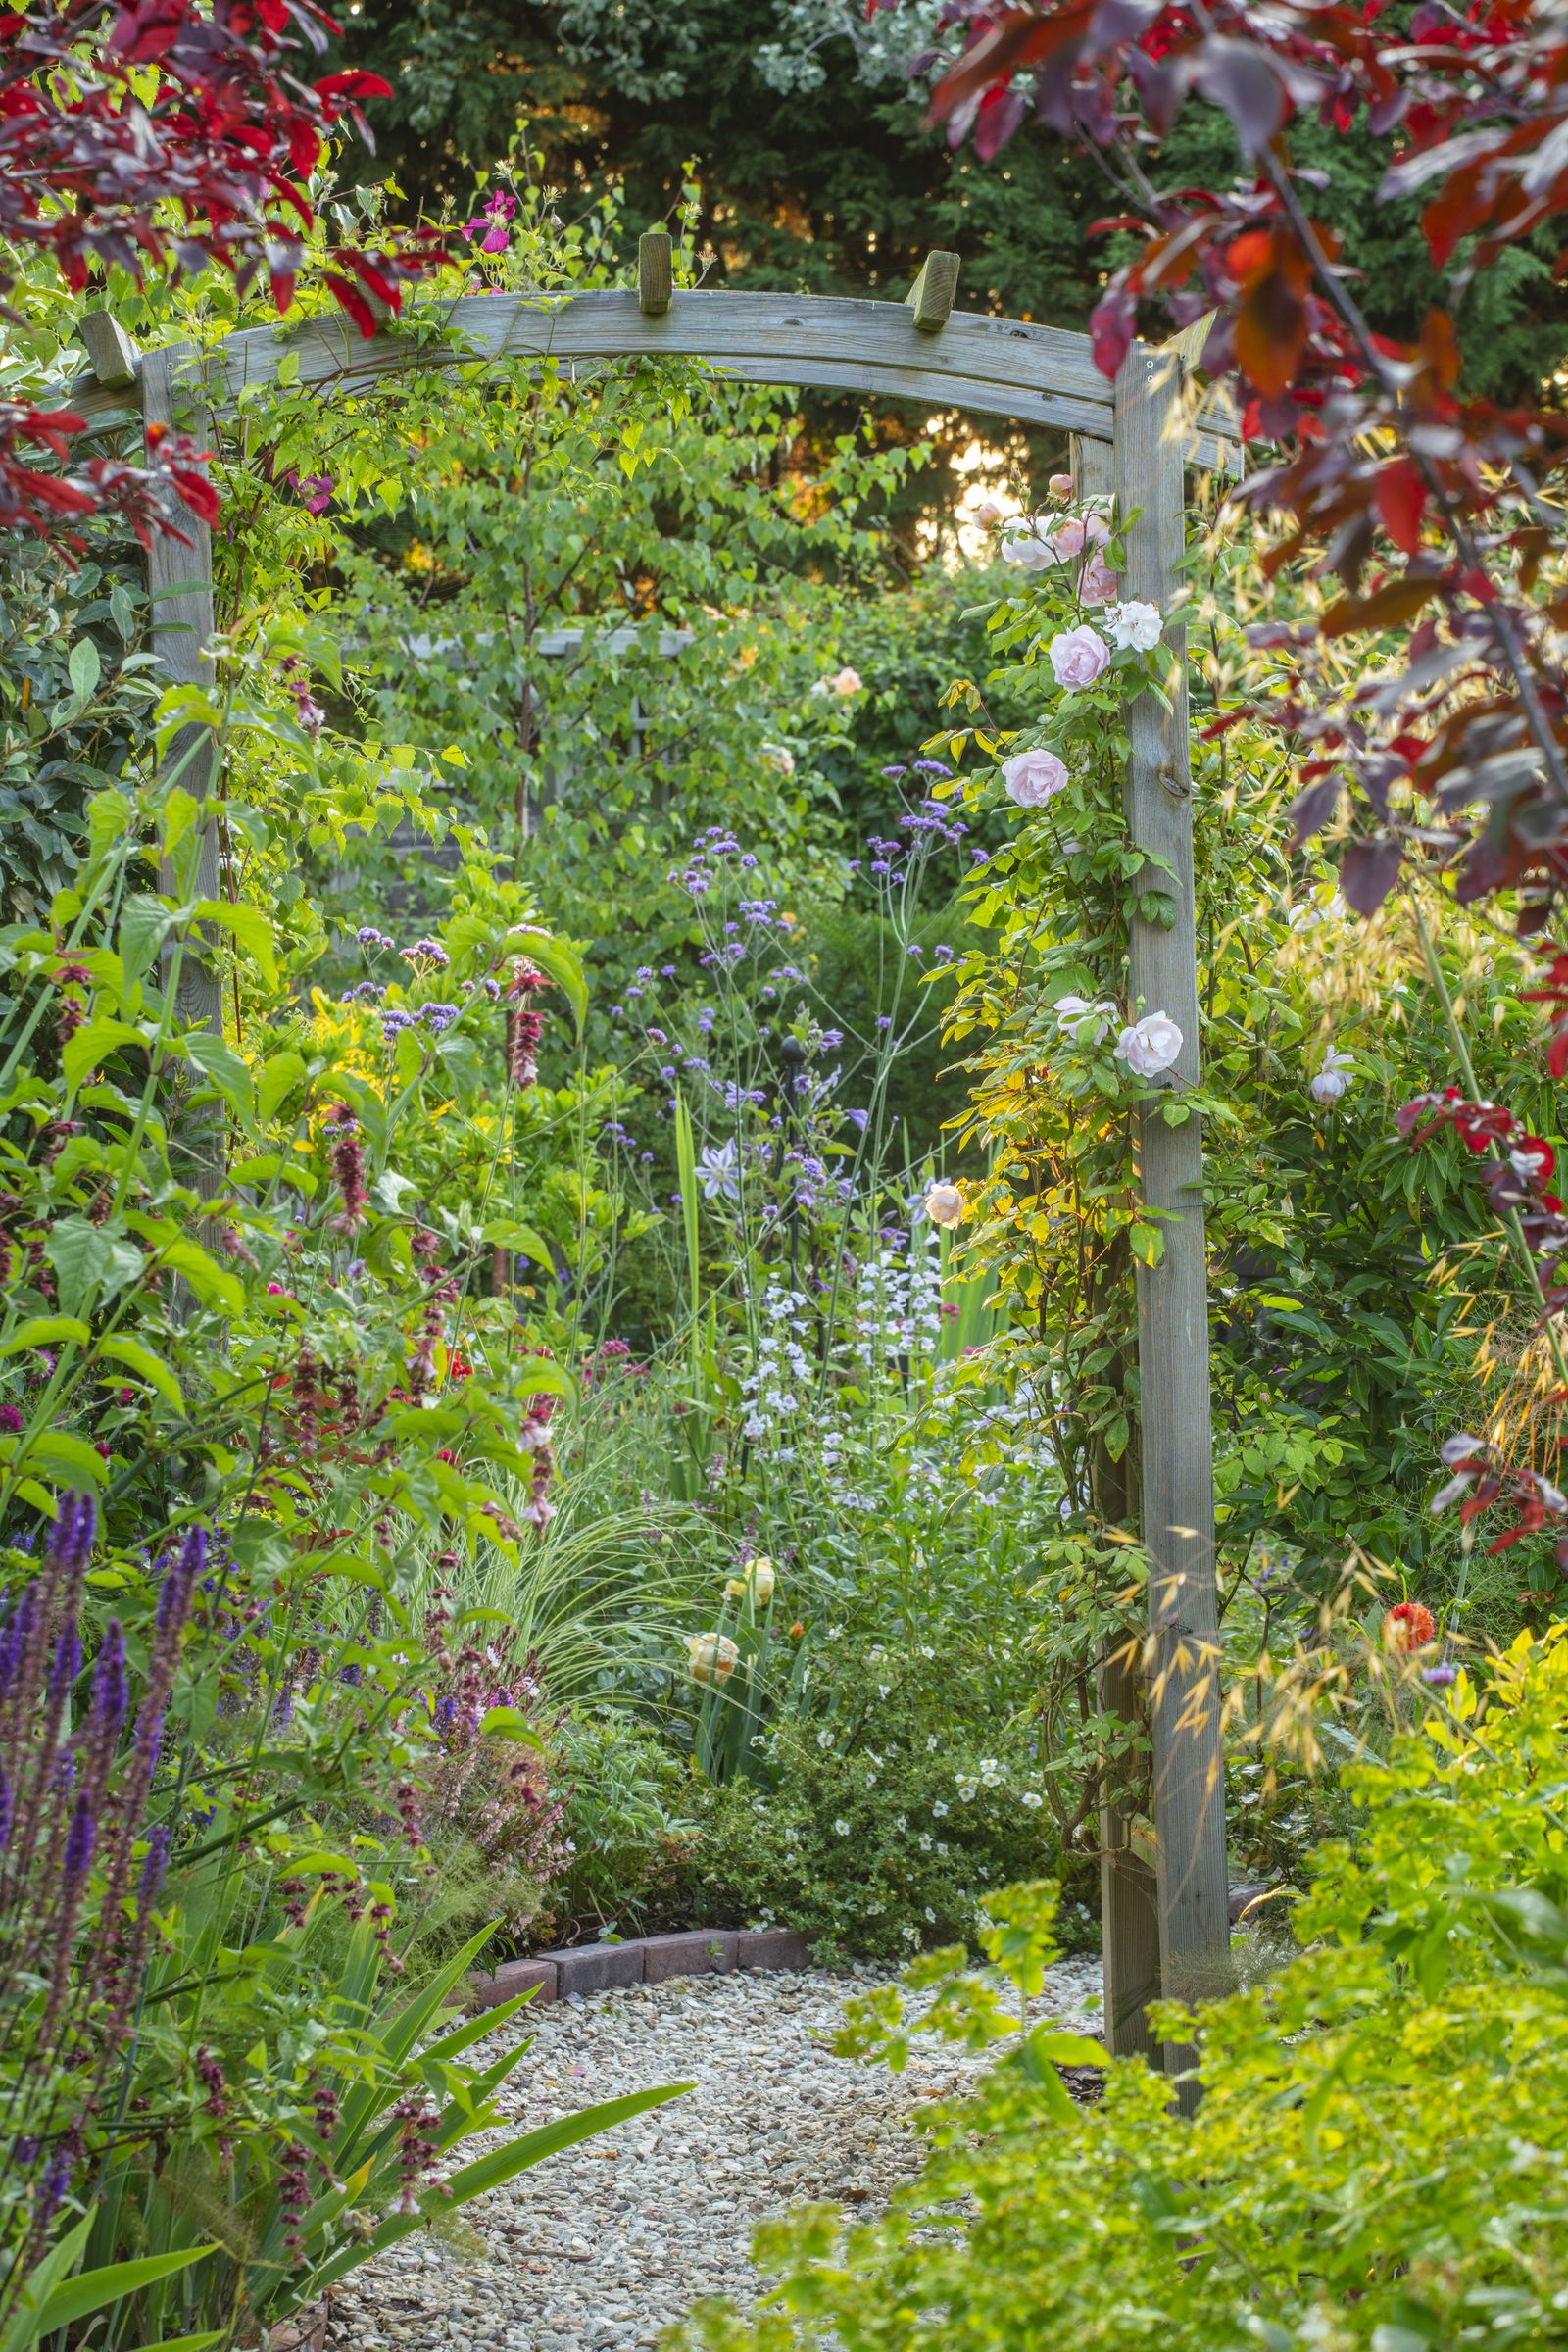 Real garden: take a tour of this award winning garden | Real Homes